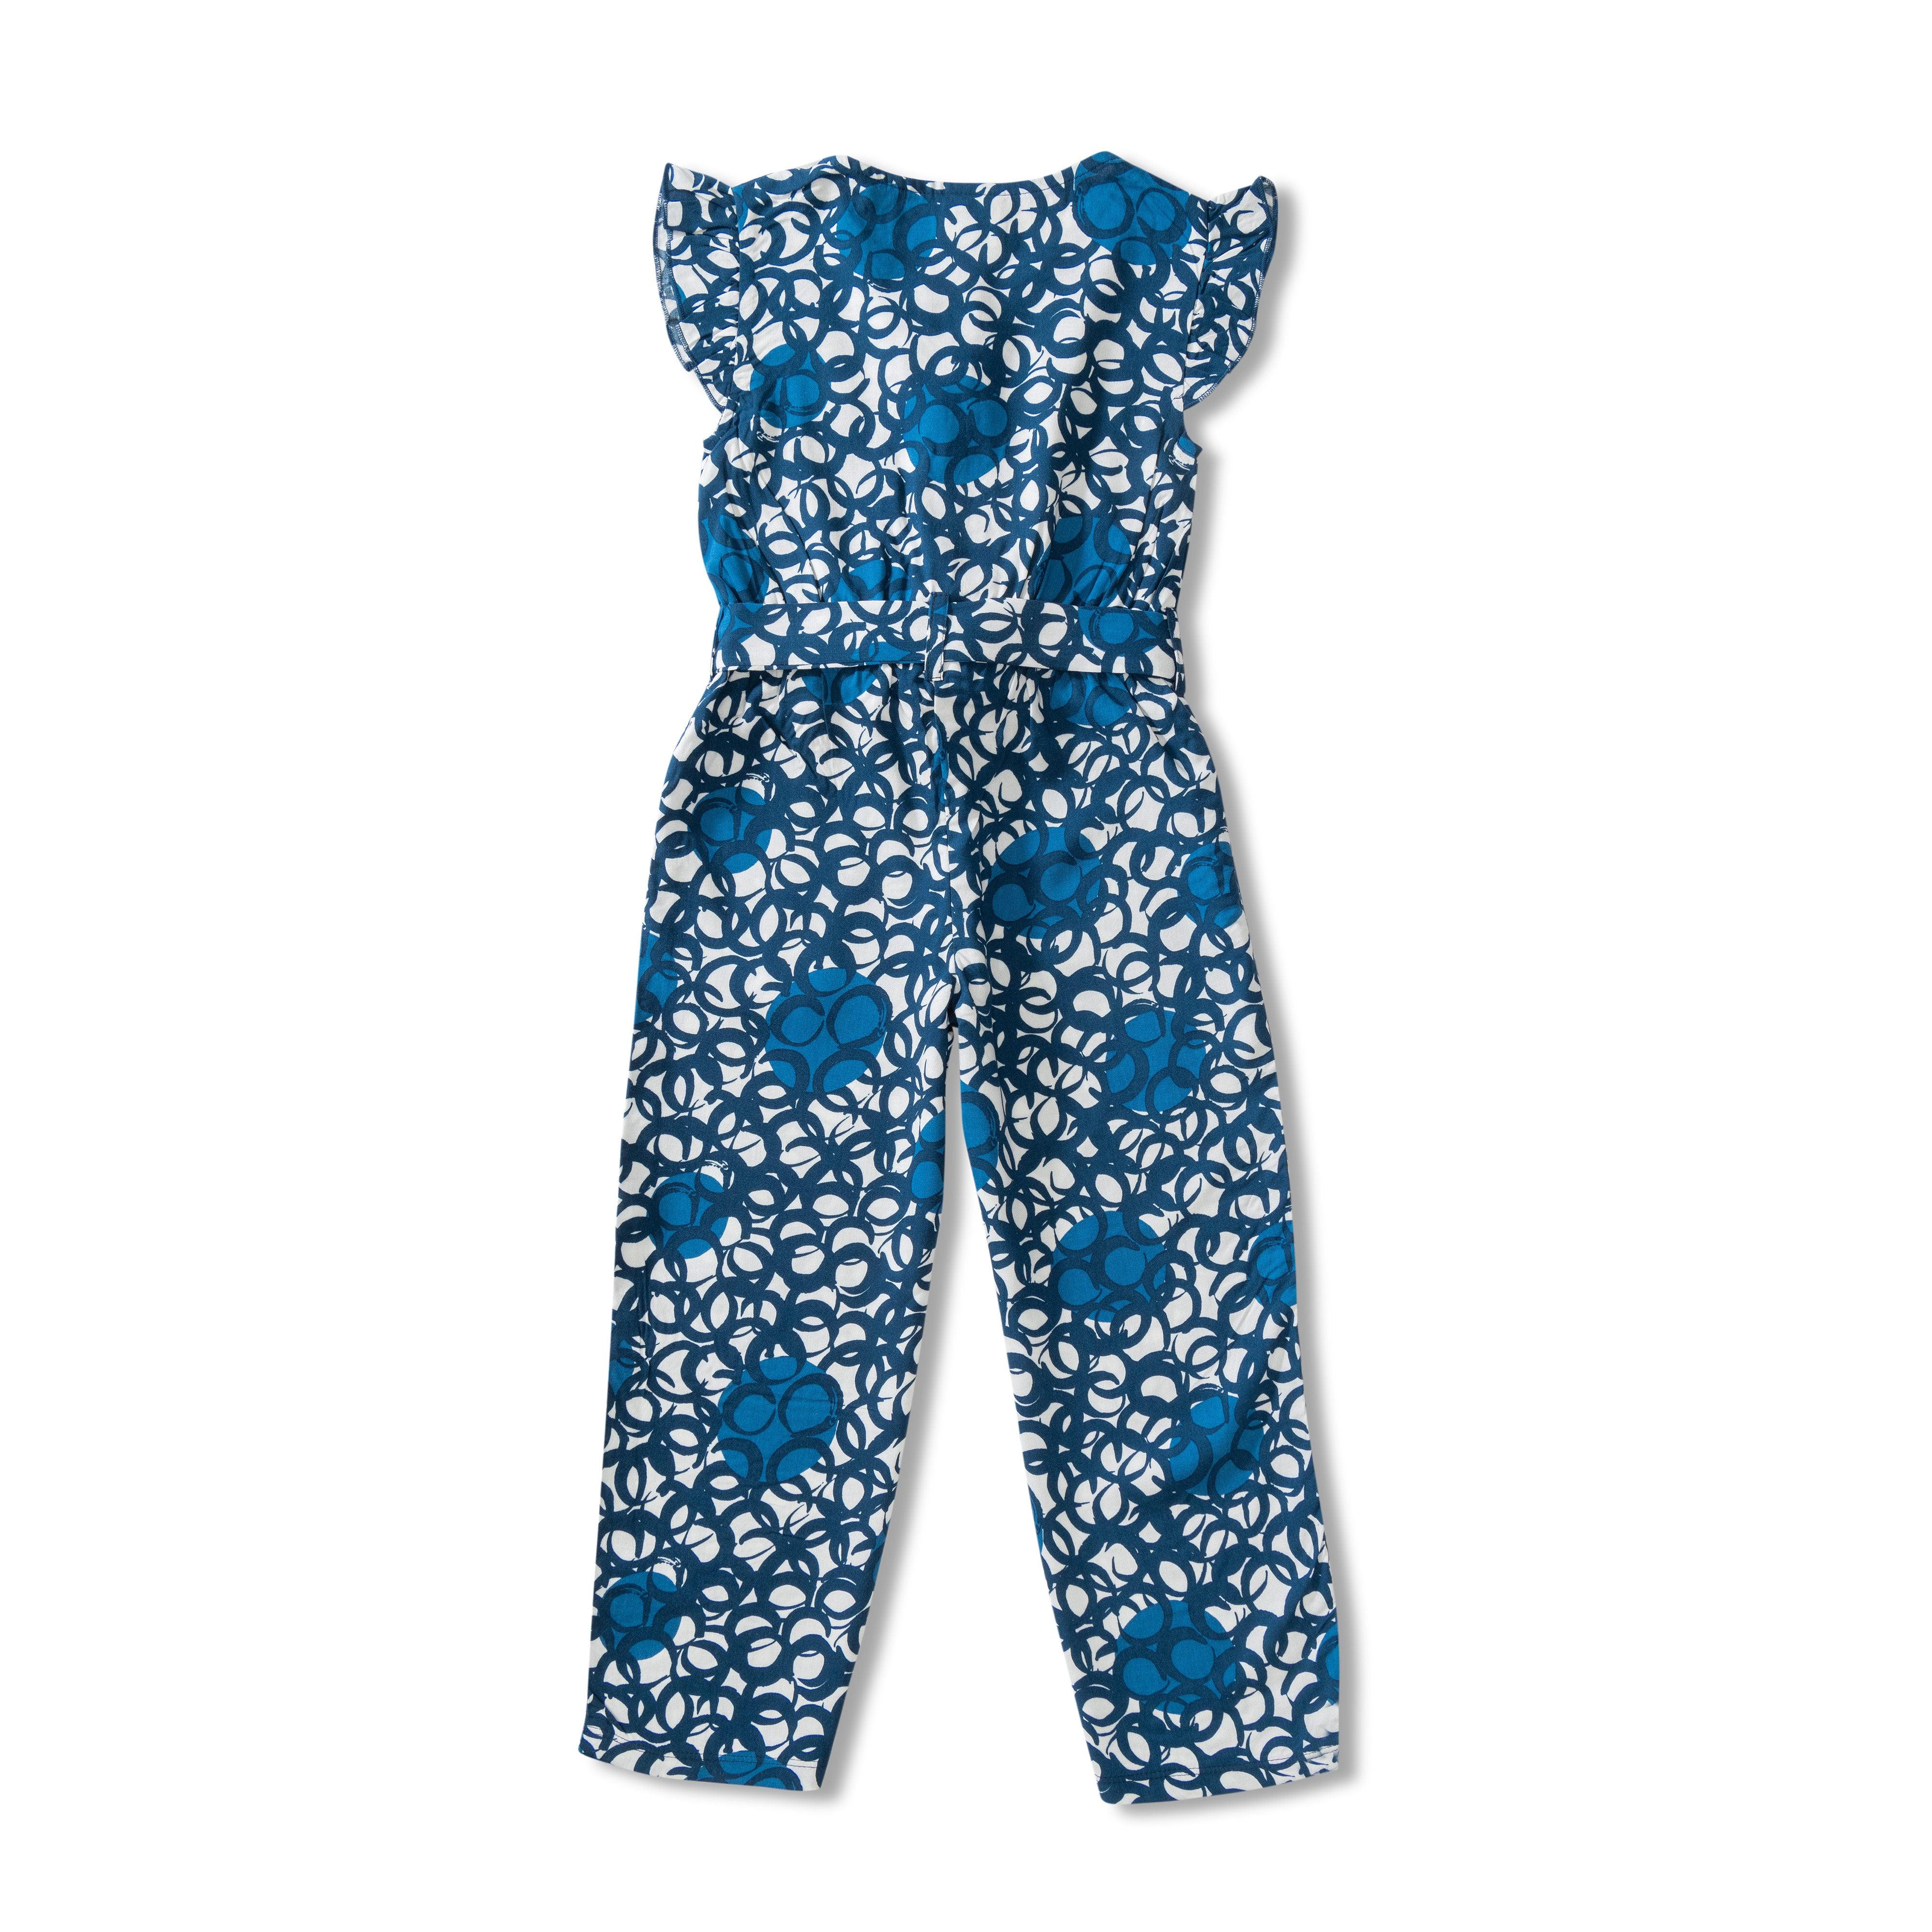 Baby Girls All Over Printed Sleeveless Jump Suit - Juscubs